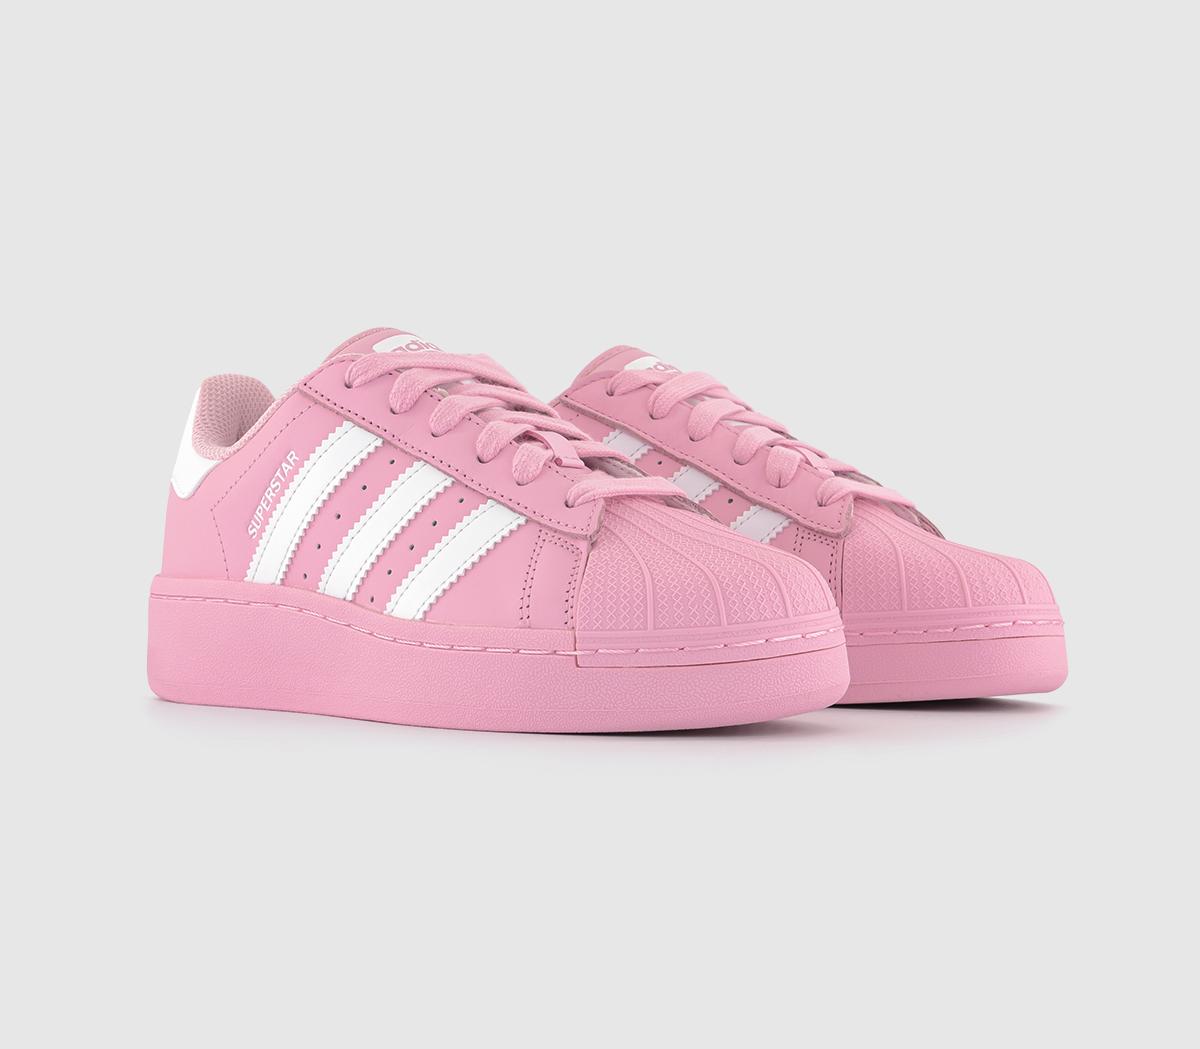 adidas Superstar XLG Trainers True Pink White True Pink - Women's Trainers